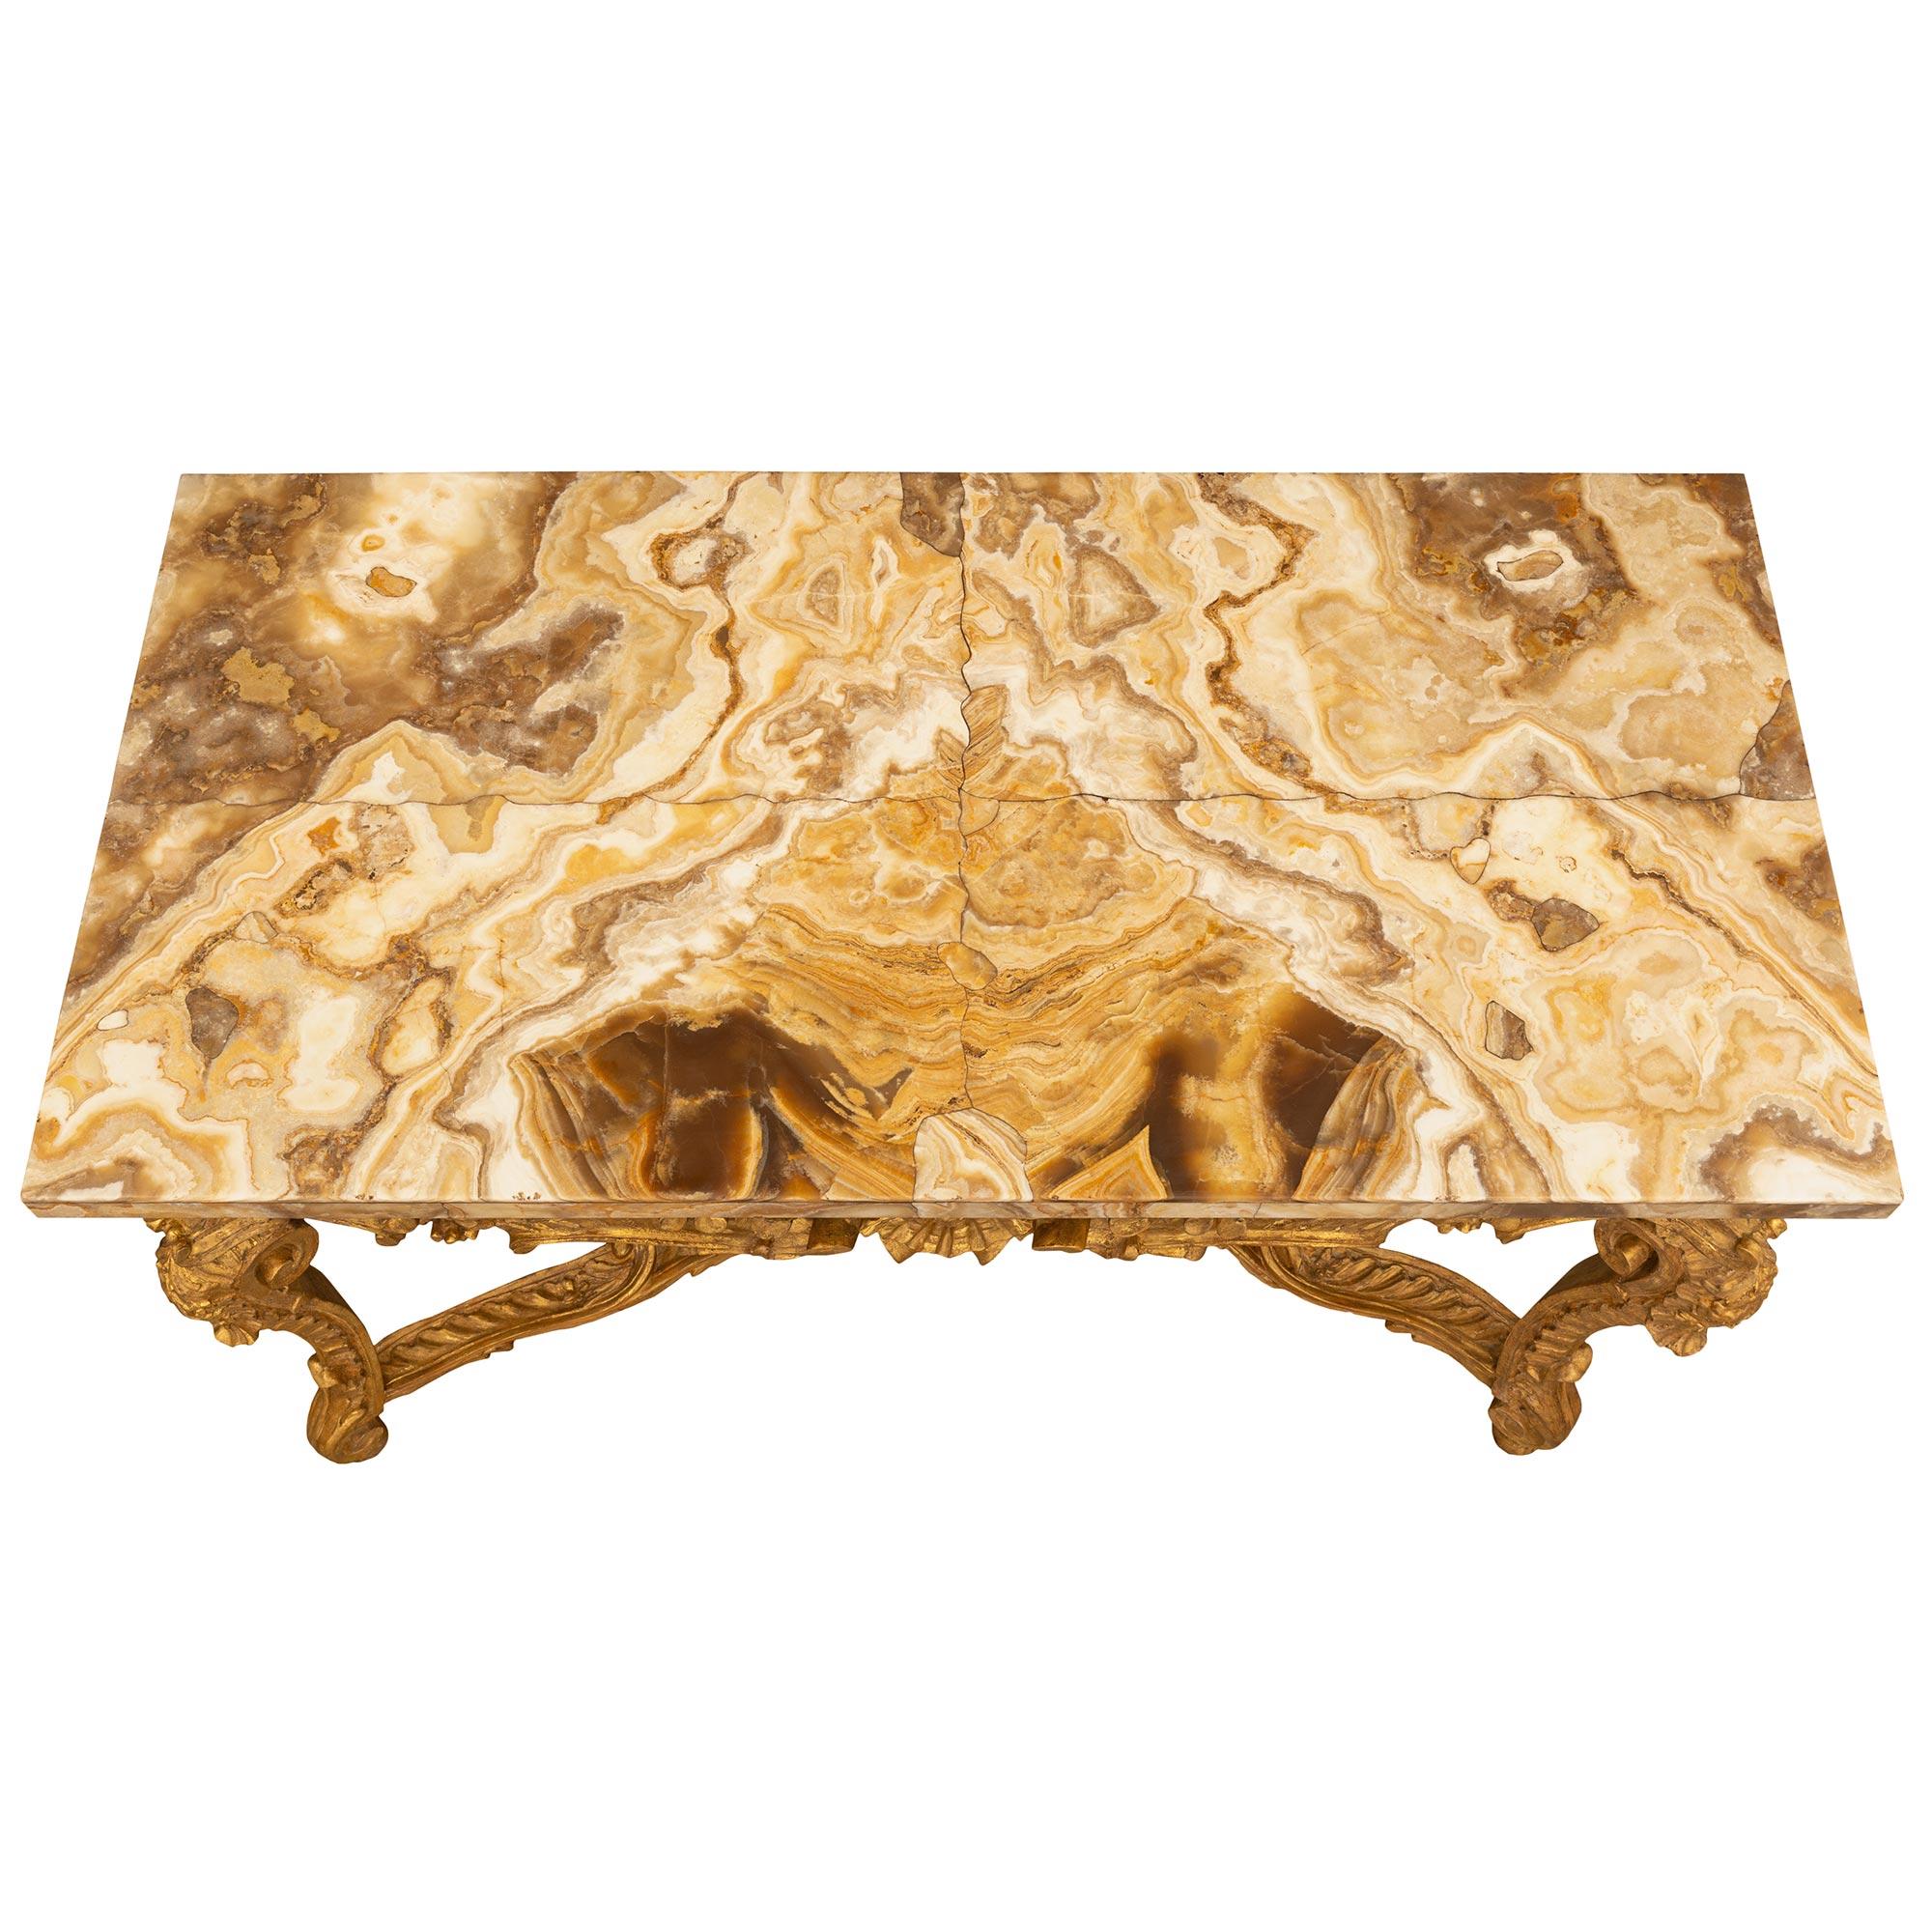 A stunning and most impressive Italian 18th century Louis XV period giltwood and Alabastro Fiorito marble console. The freestanding console is raised by beautiful elegant cabriole legs with fine scrolled feet and lovely reeded and richly carved